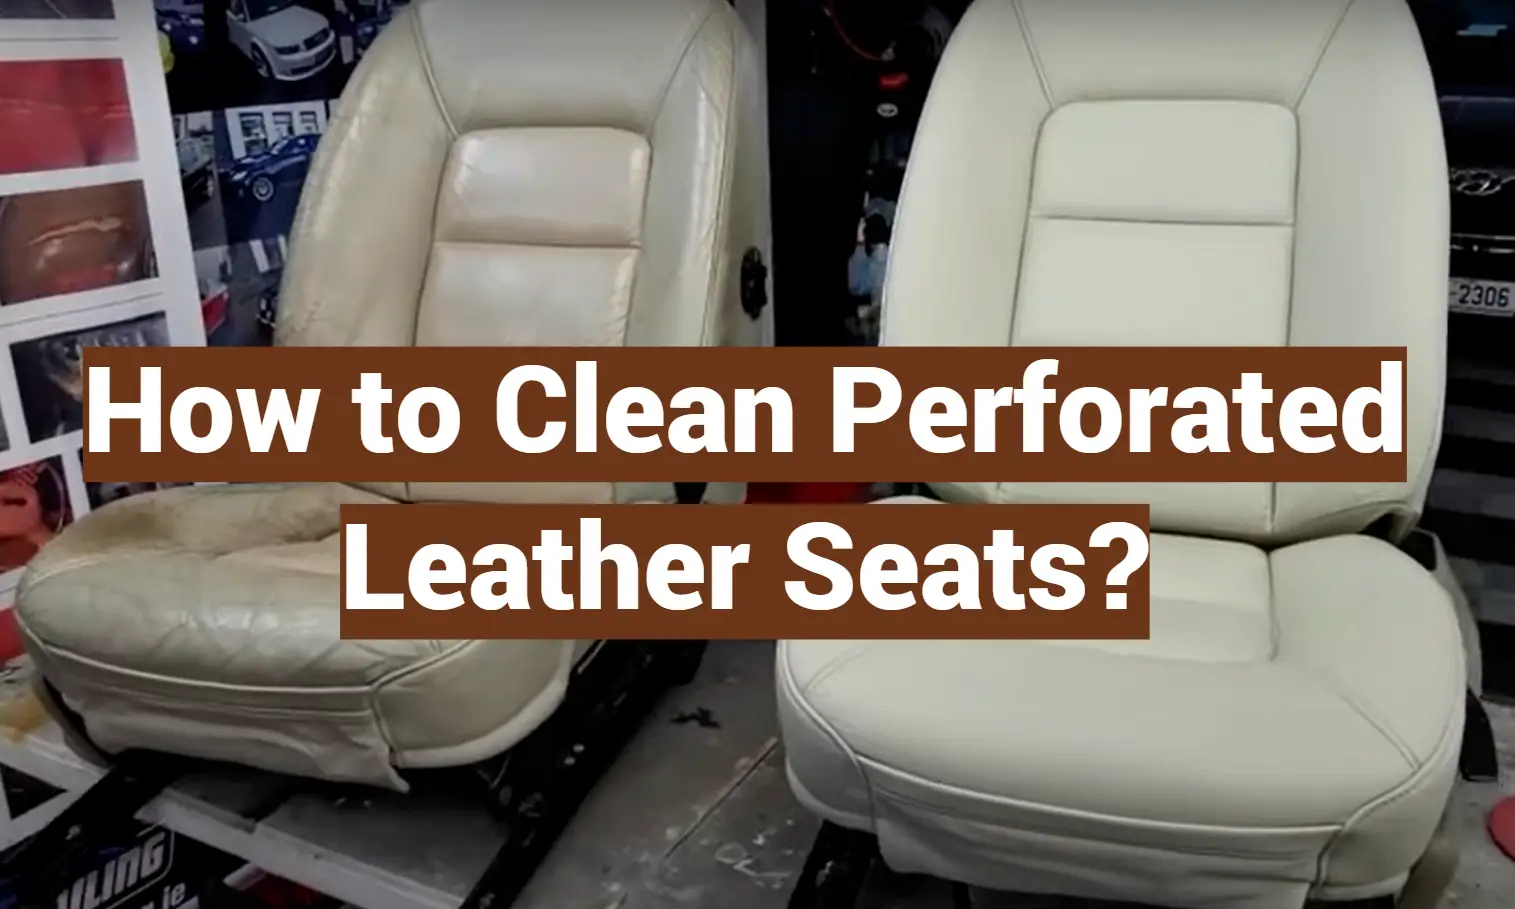 How to Clean Perforated Leather Seats?